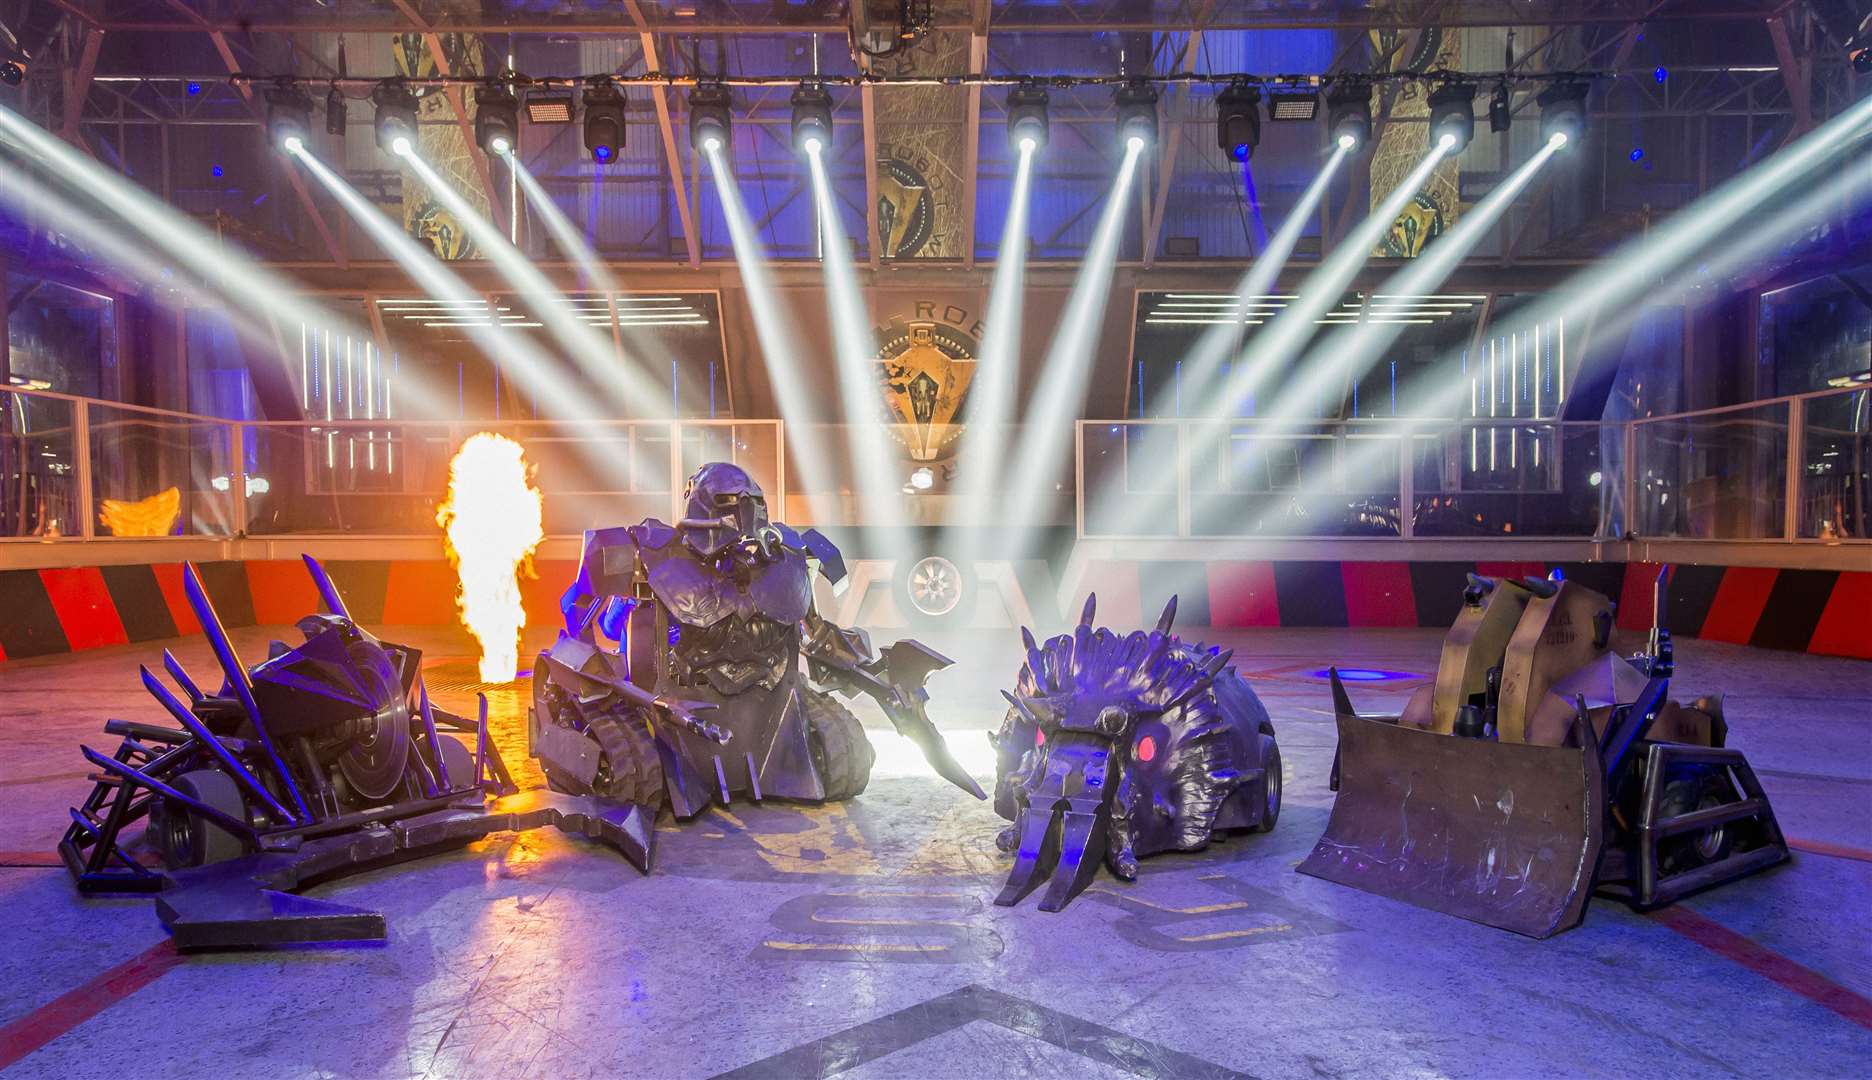 Robot Wars is stopping in Maidstone